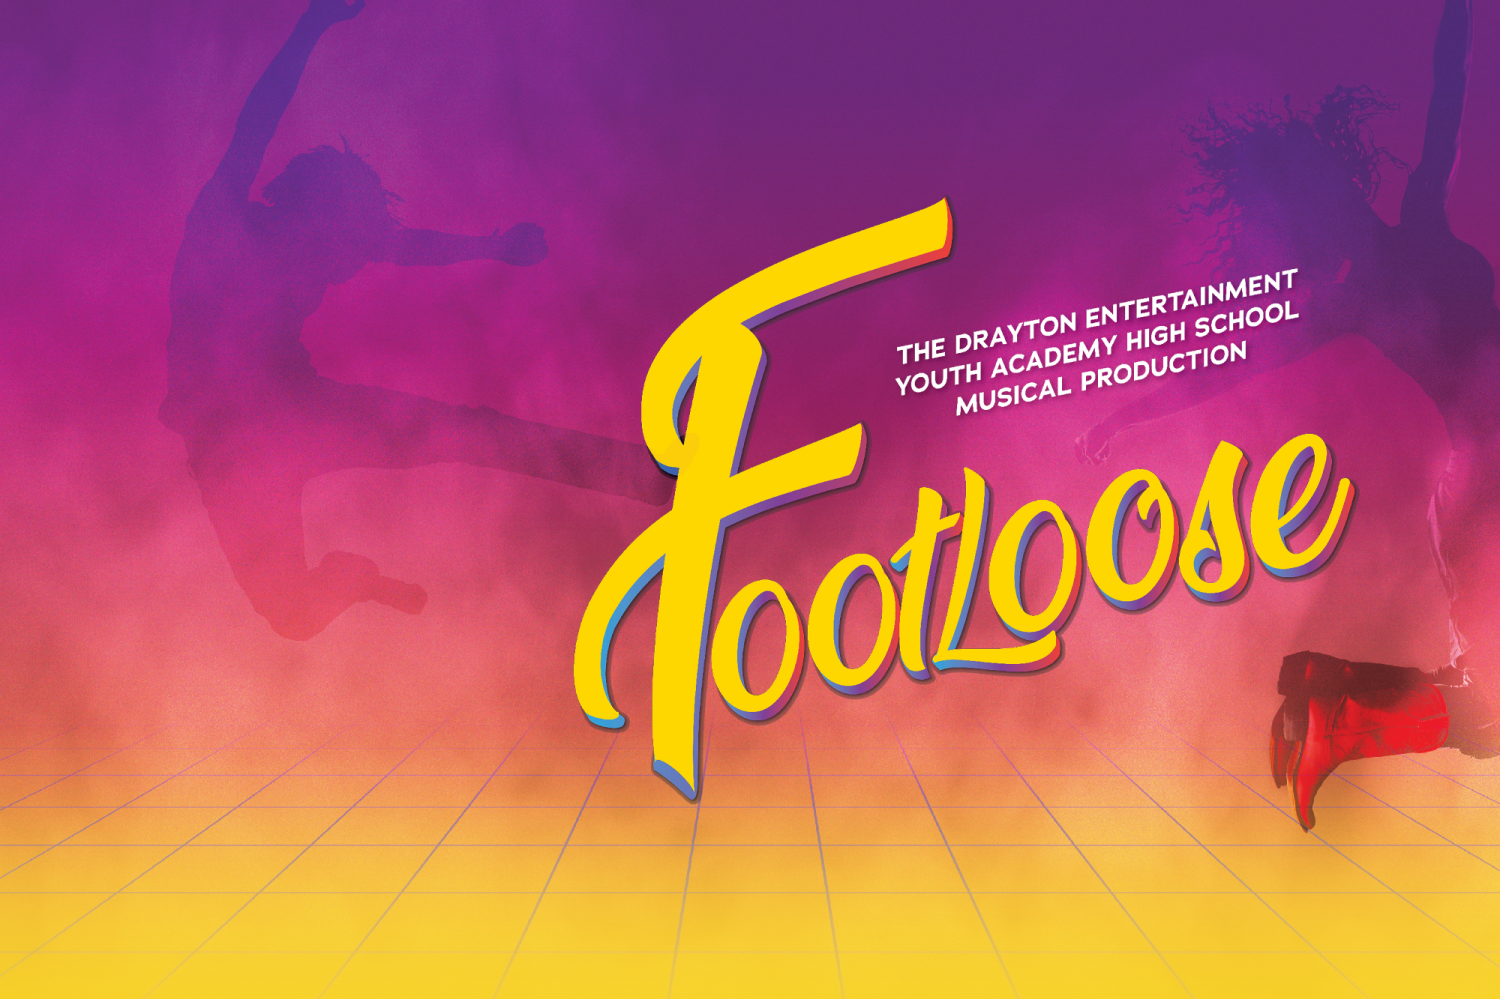 Show artwork for Footloose showing two silhouettes of dancers leaping in the air, and the title of the show in yellow